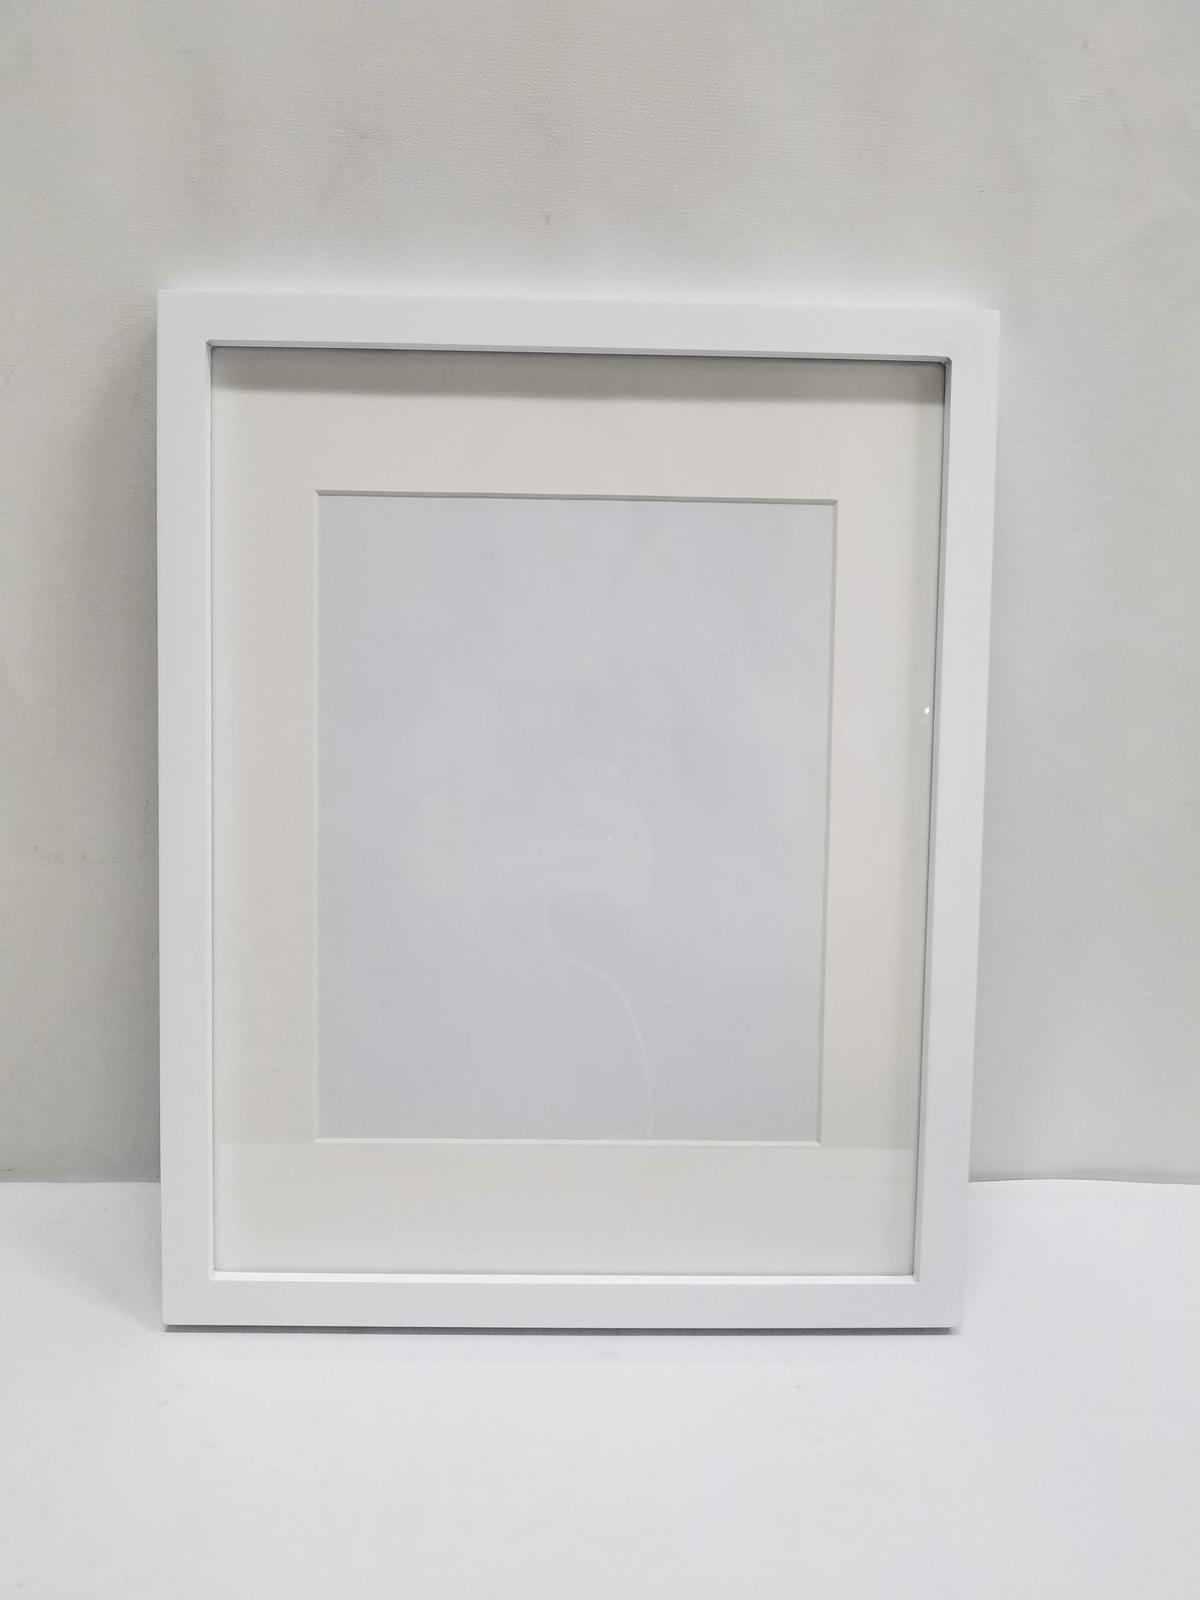 White Frame: 11" x 14" matted to 8" x 10" - New